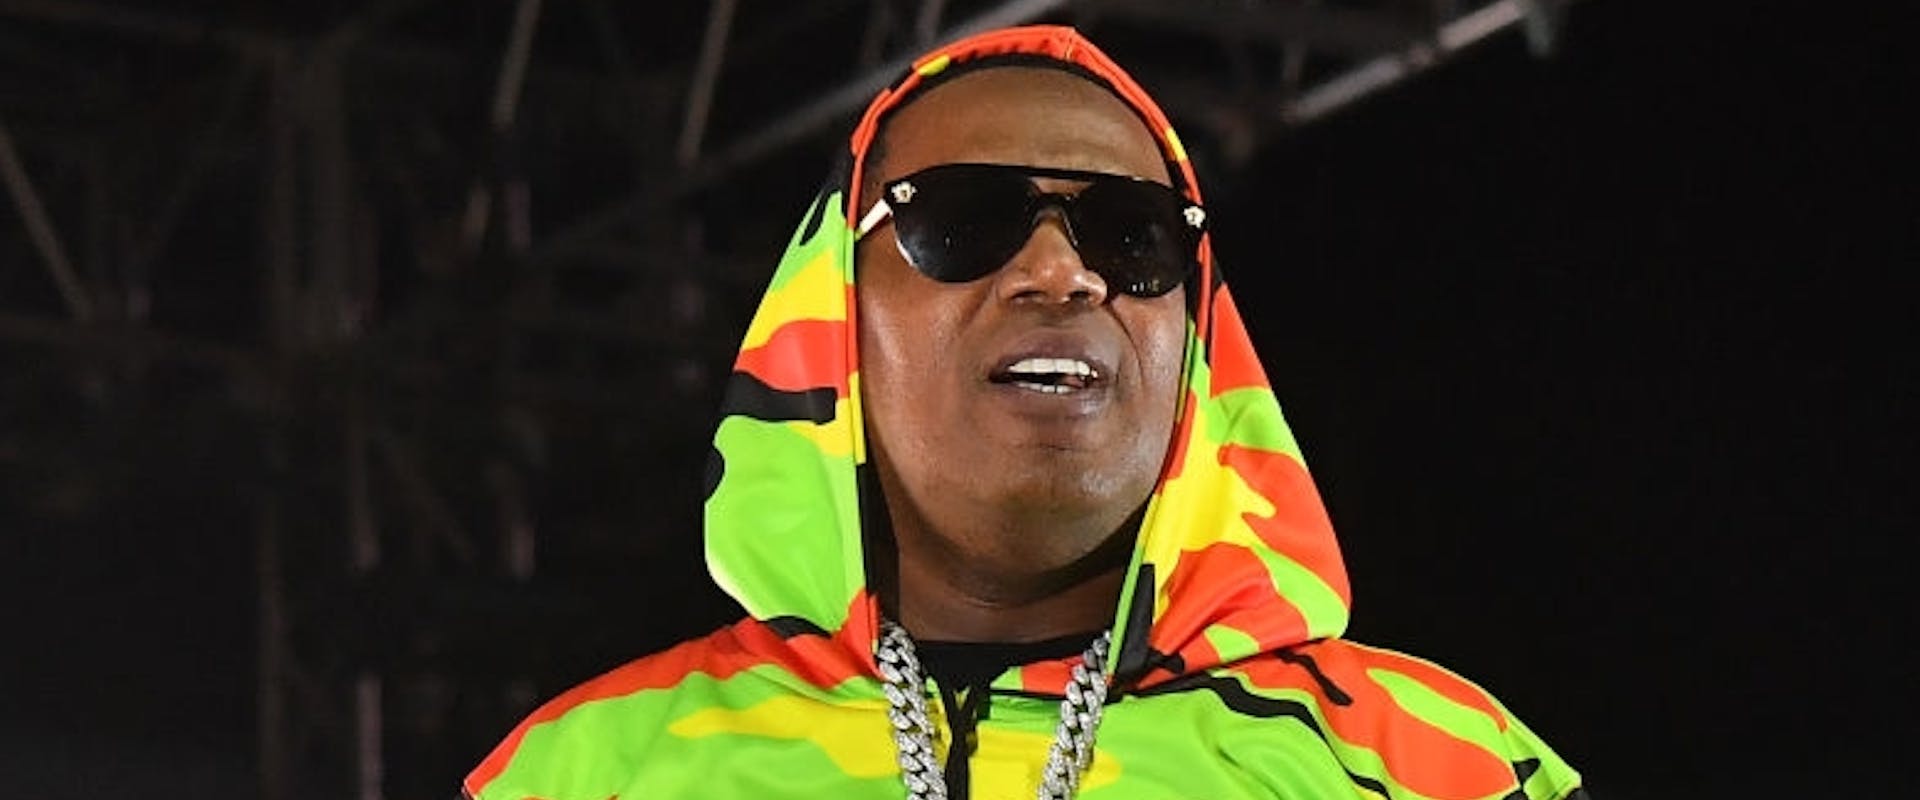 Rapper Master P performs onstage during his No Limit Reunion Tour at 2020 Funkfest at Legion Field on November 07, 2020 in Birmingham, Alabama. 